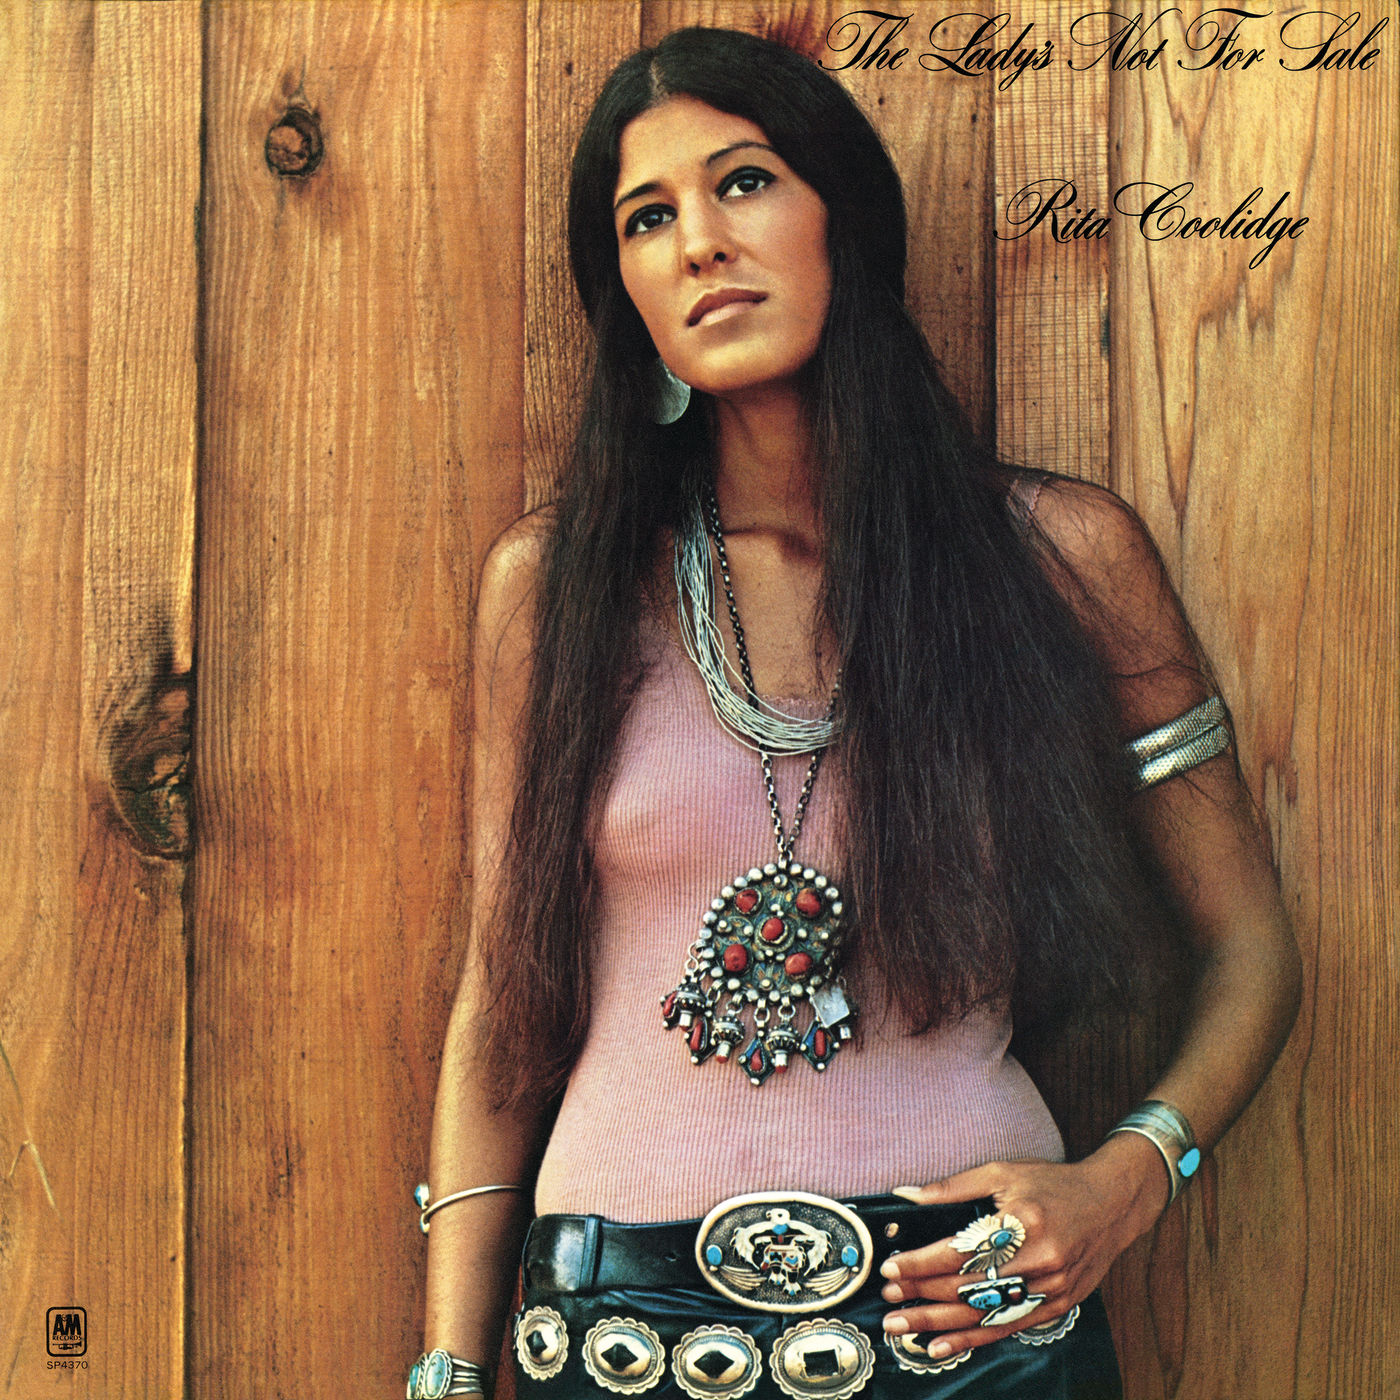 Rita Coolidge - The Lady’s Not For Sale (1972/2021) [FLAC 24bit/96kHz]